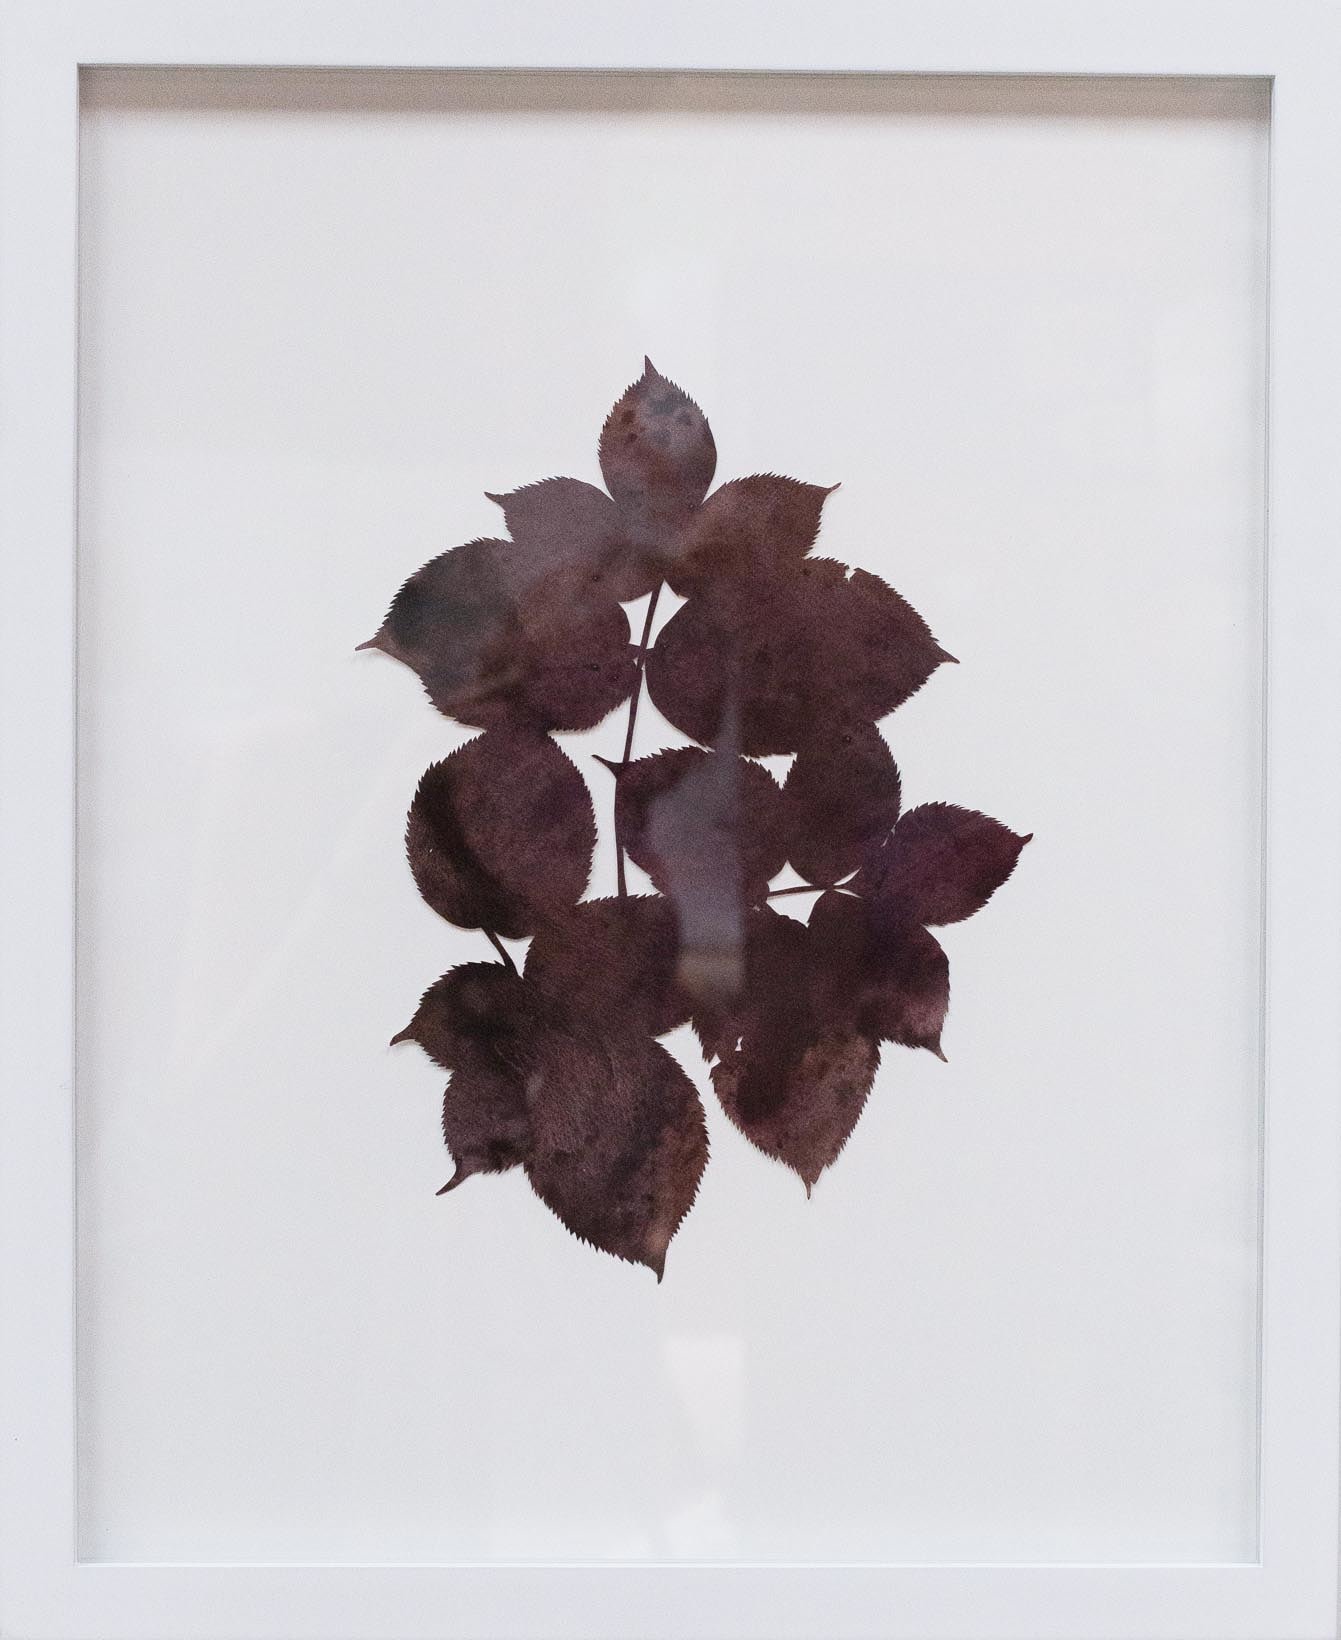 Hannah Cole  Purple Serrated Weed, 2018  watercolor on cut paper  Framed: 20h x 16w in 50.80h x 40.64w cm  HC_047